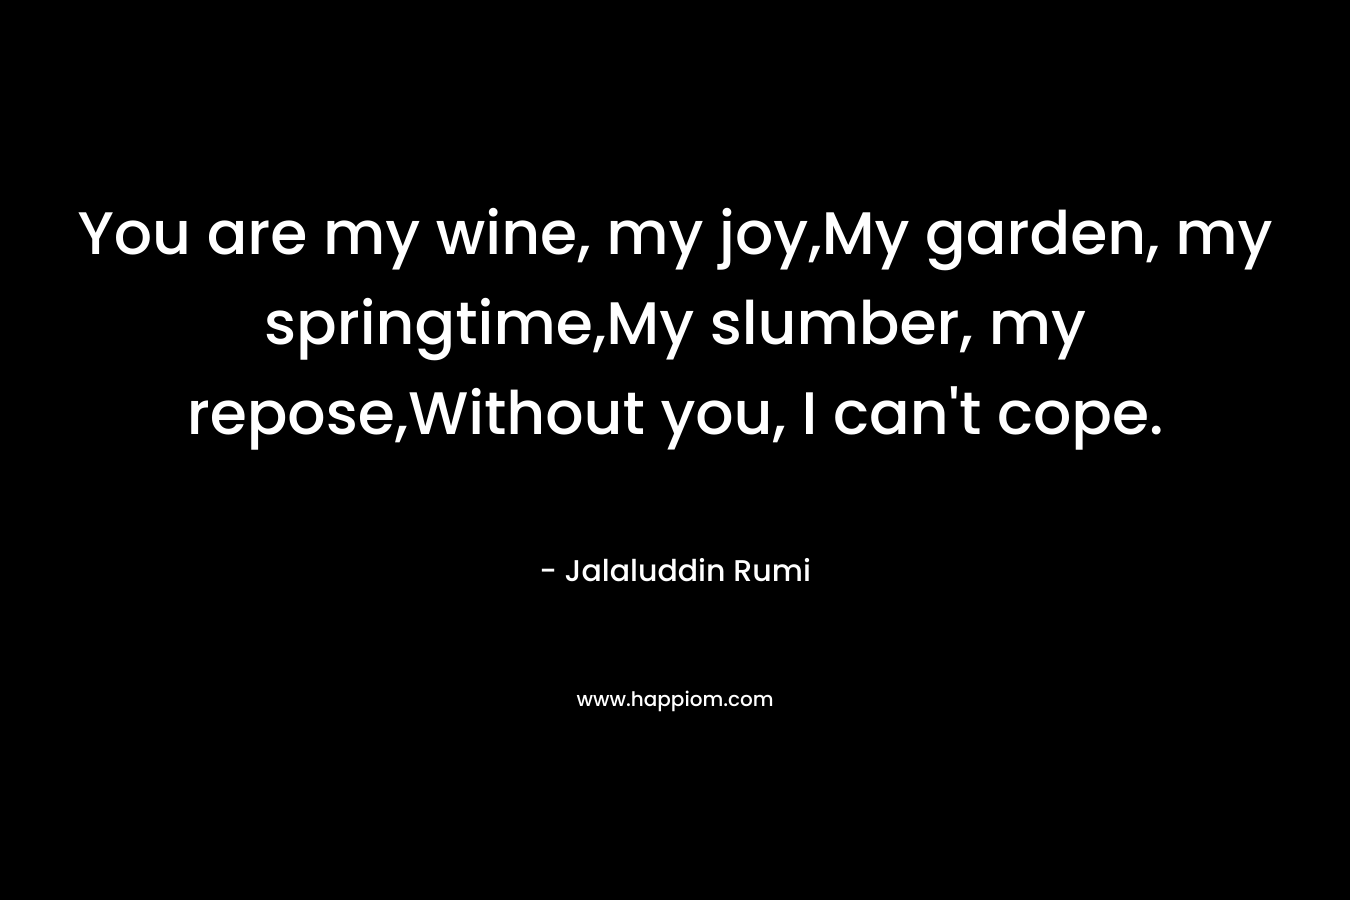 You are my wine, my joy,My garden, my springtime,My slumber, my repose,Without you, I can't cope.